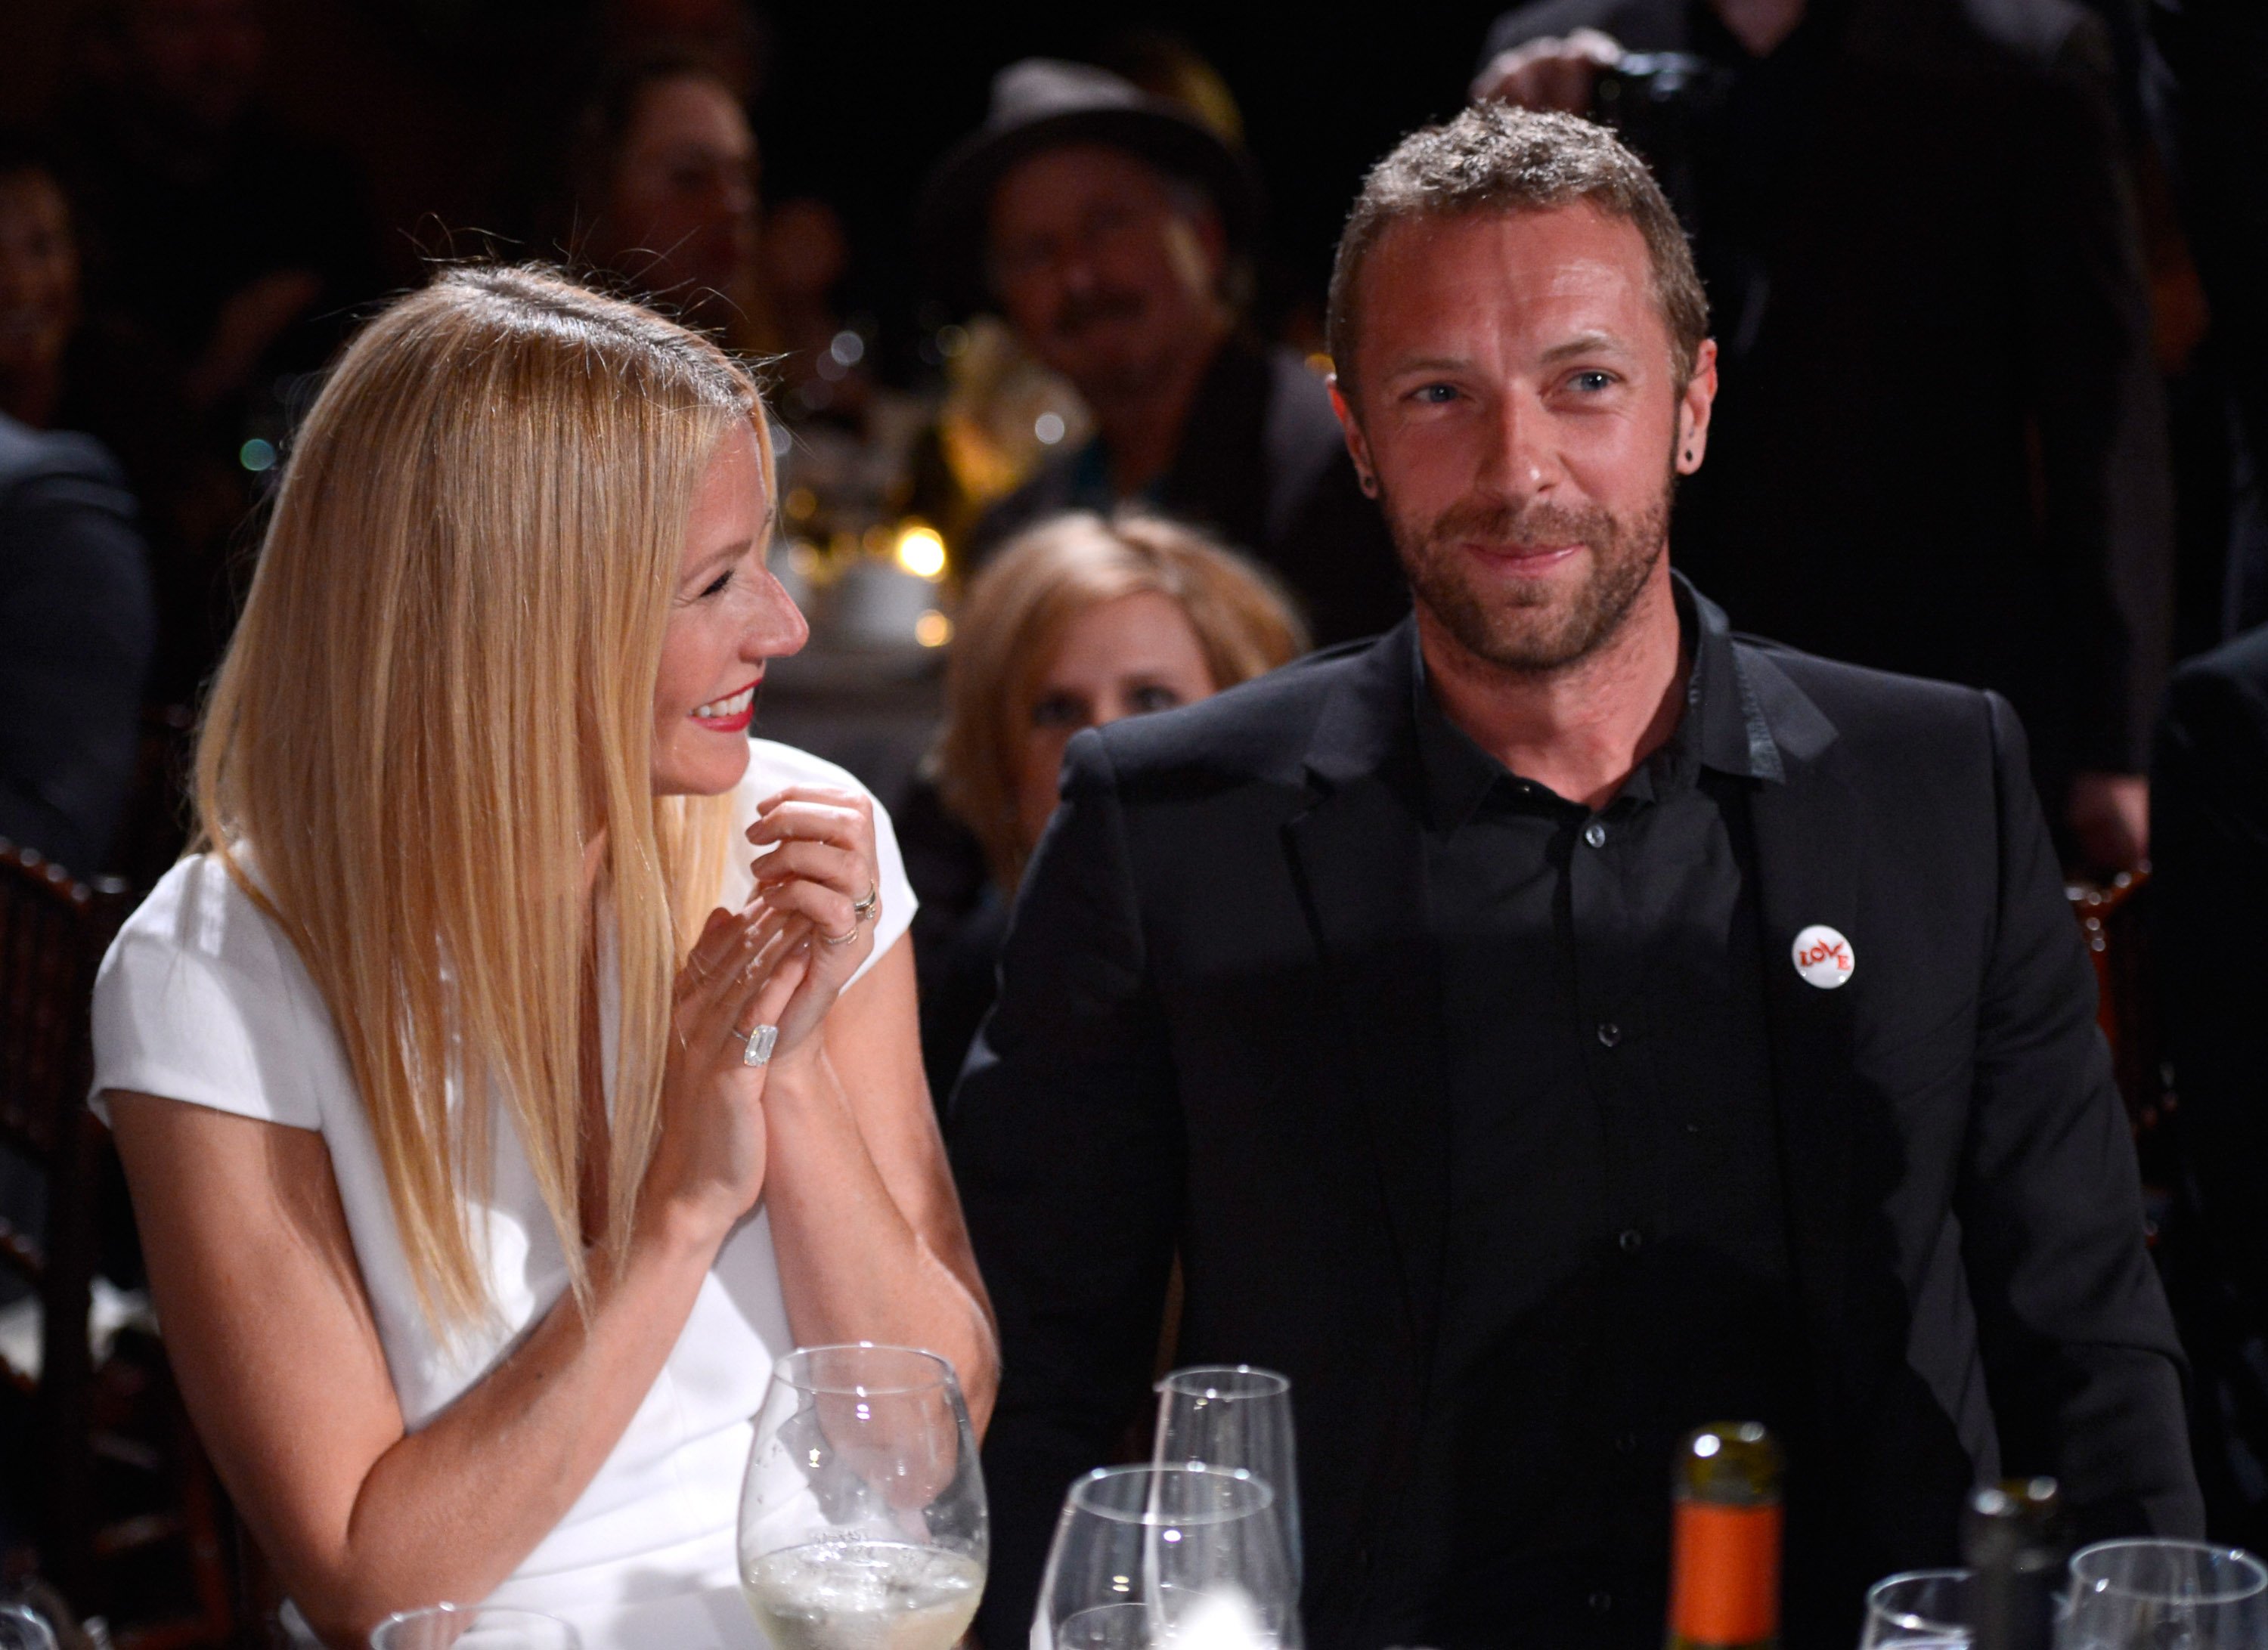 Gwyneth Paltrow and Chris Martin attend the 3rd annual Sean Penn & Friends HELP HAITI HOME Gala benefiting J/P HRO presented by Giorgio Armani at Montage Beverly Hills on January 11, 2014 in Beverly Hills, California | Source: Getty Images